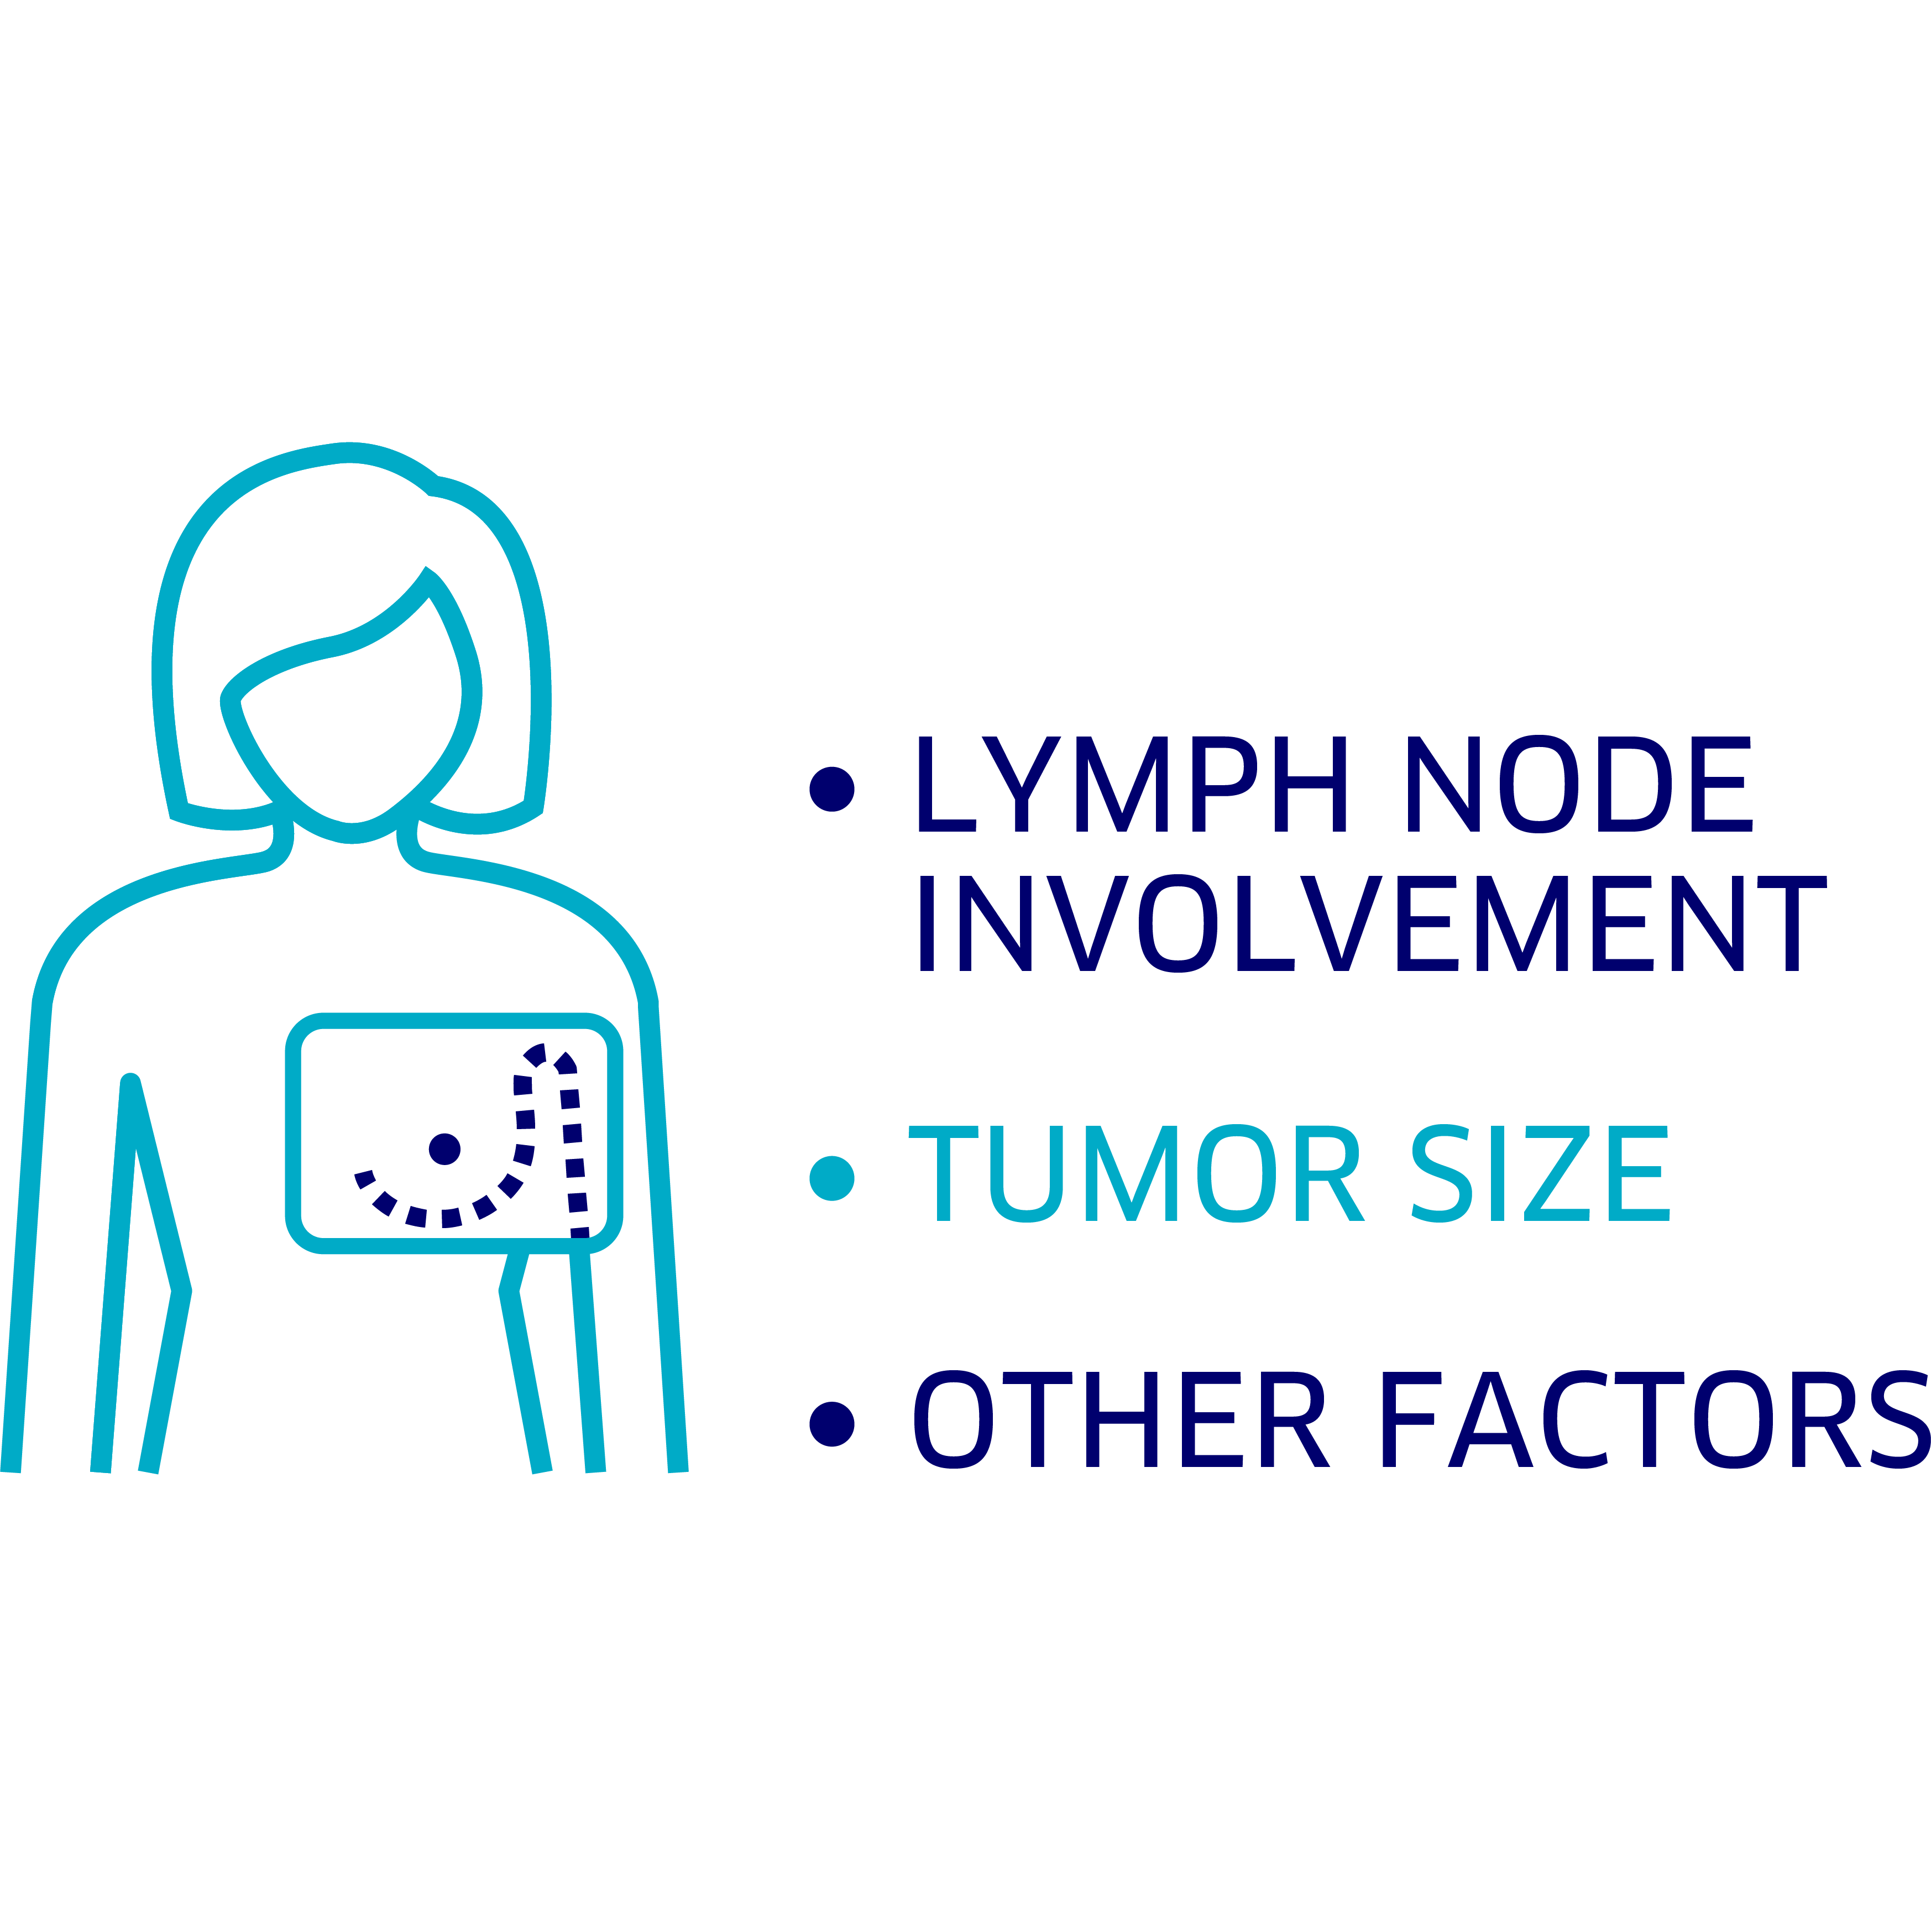 lymph node involvement, tumor size and many other factors impact the risk of breast cancer